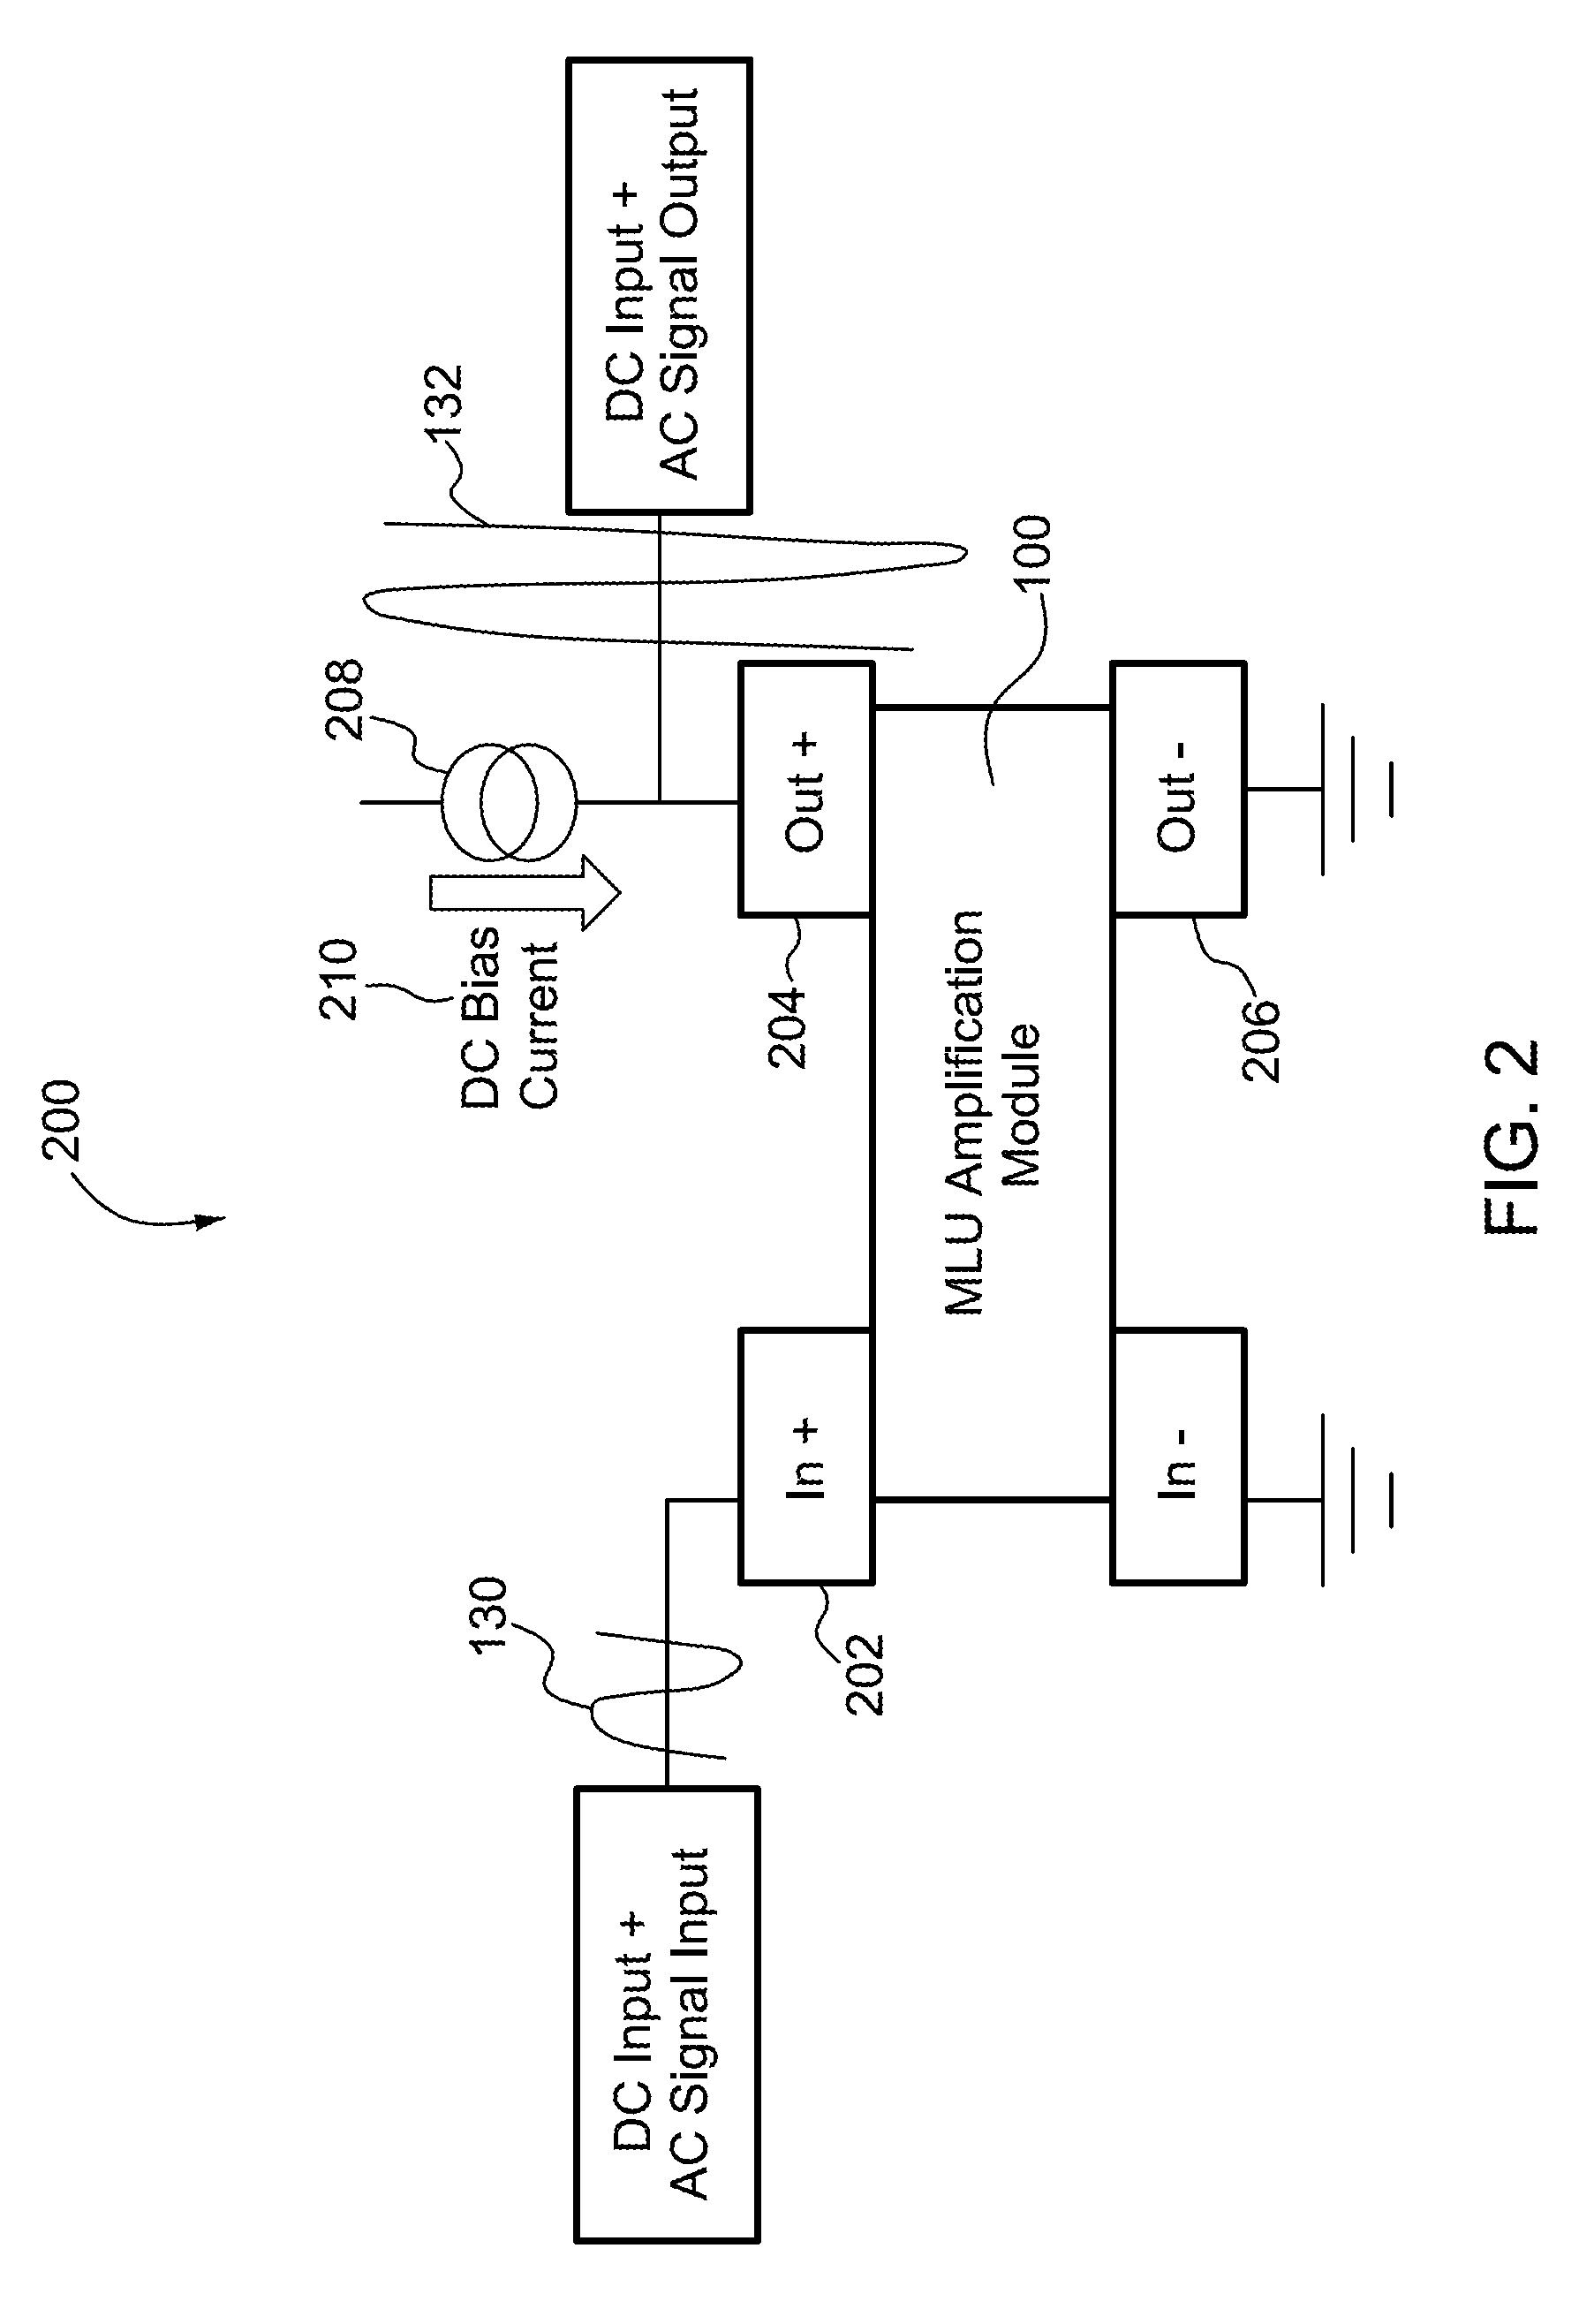 Magnetic Logic Units Configured to Measure Magnetic Field Direction